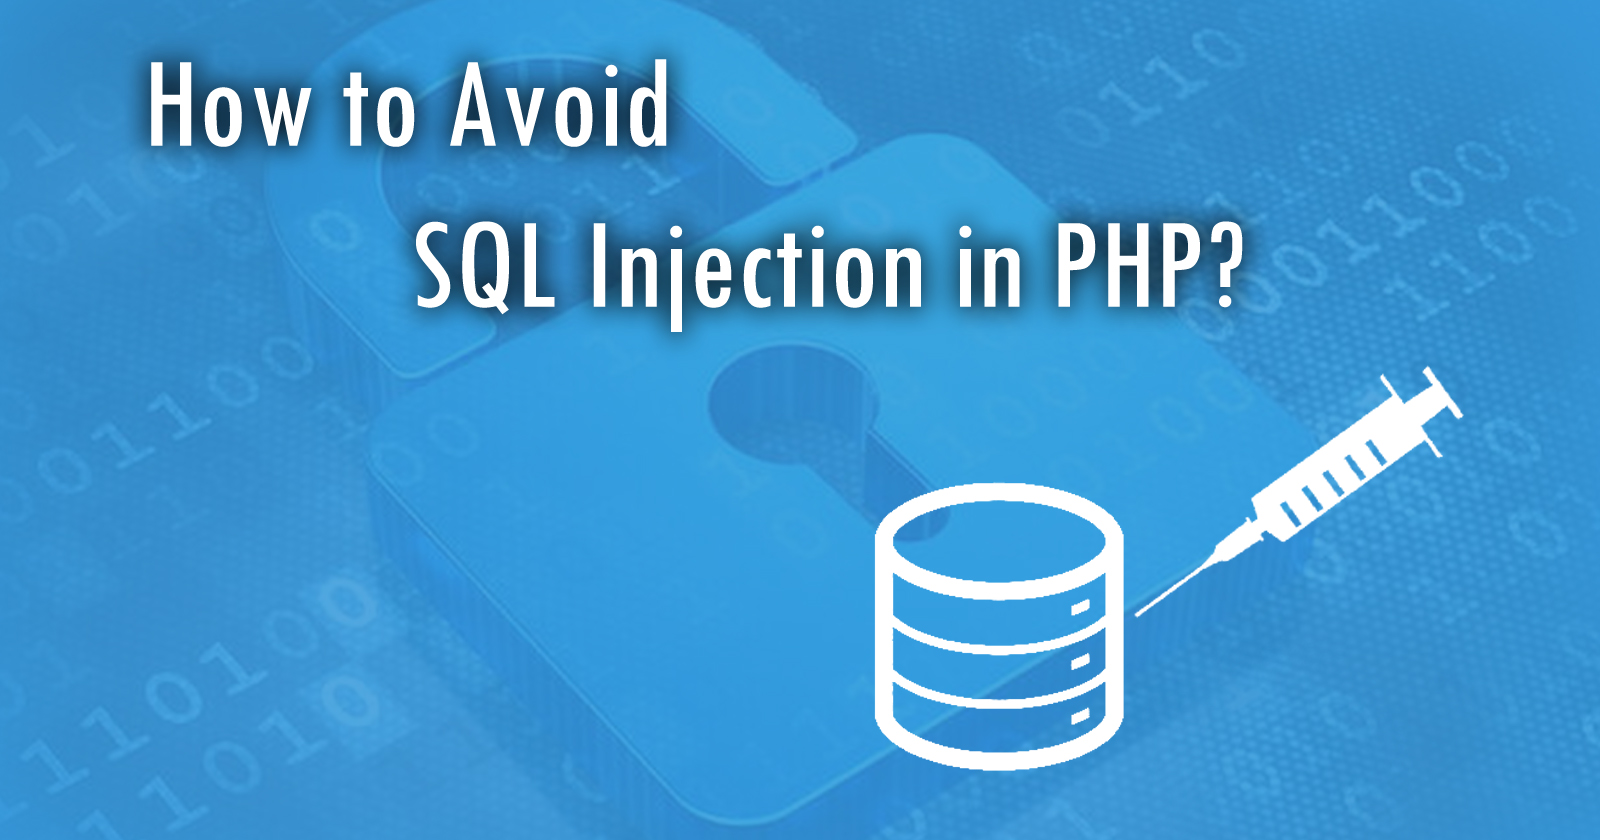 How can I prevent SQL injection in PHP?